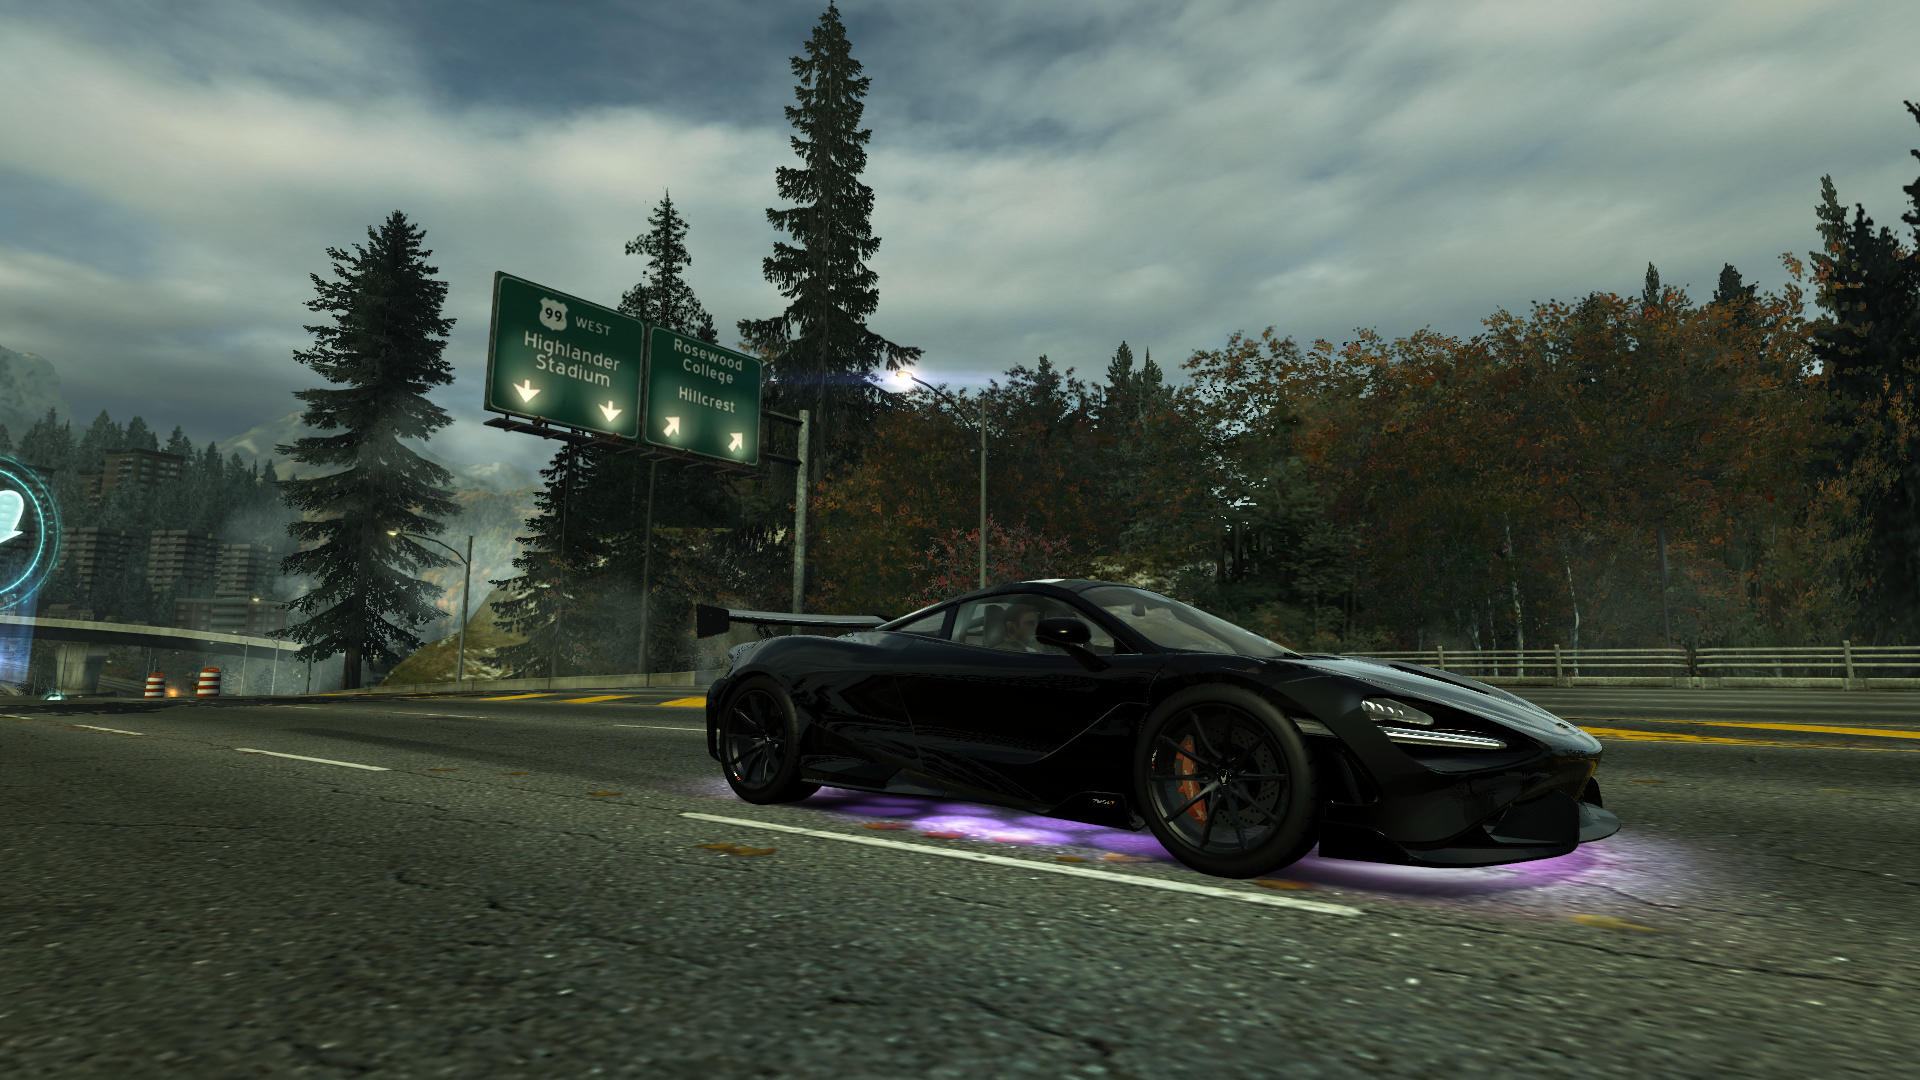 General 1920x1080 Need for Speed: World Need for Speed car vehicle black cars video games screen shot